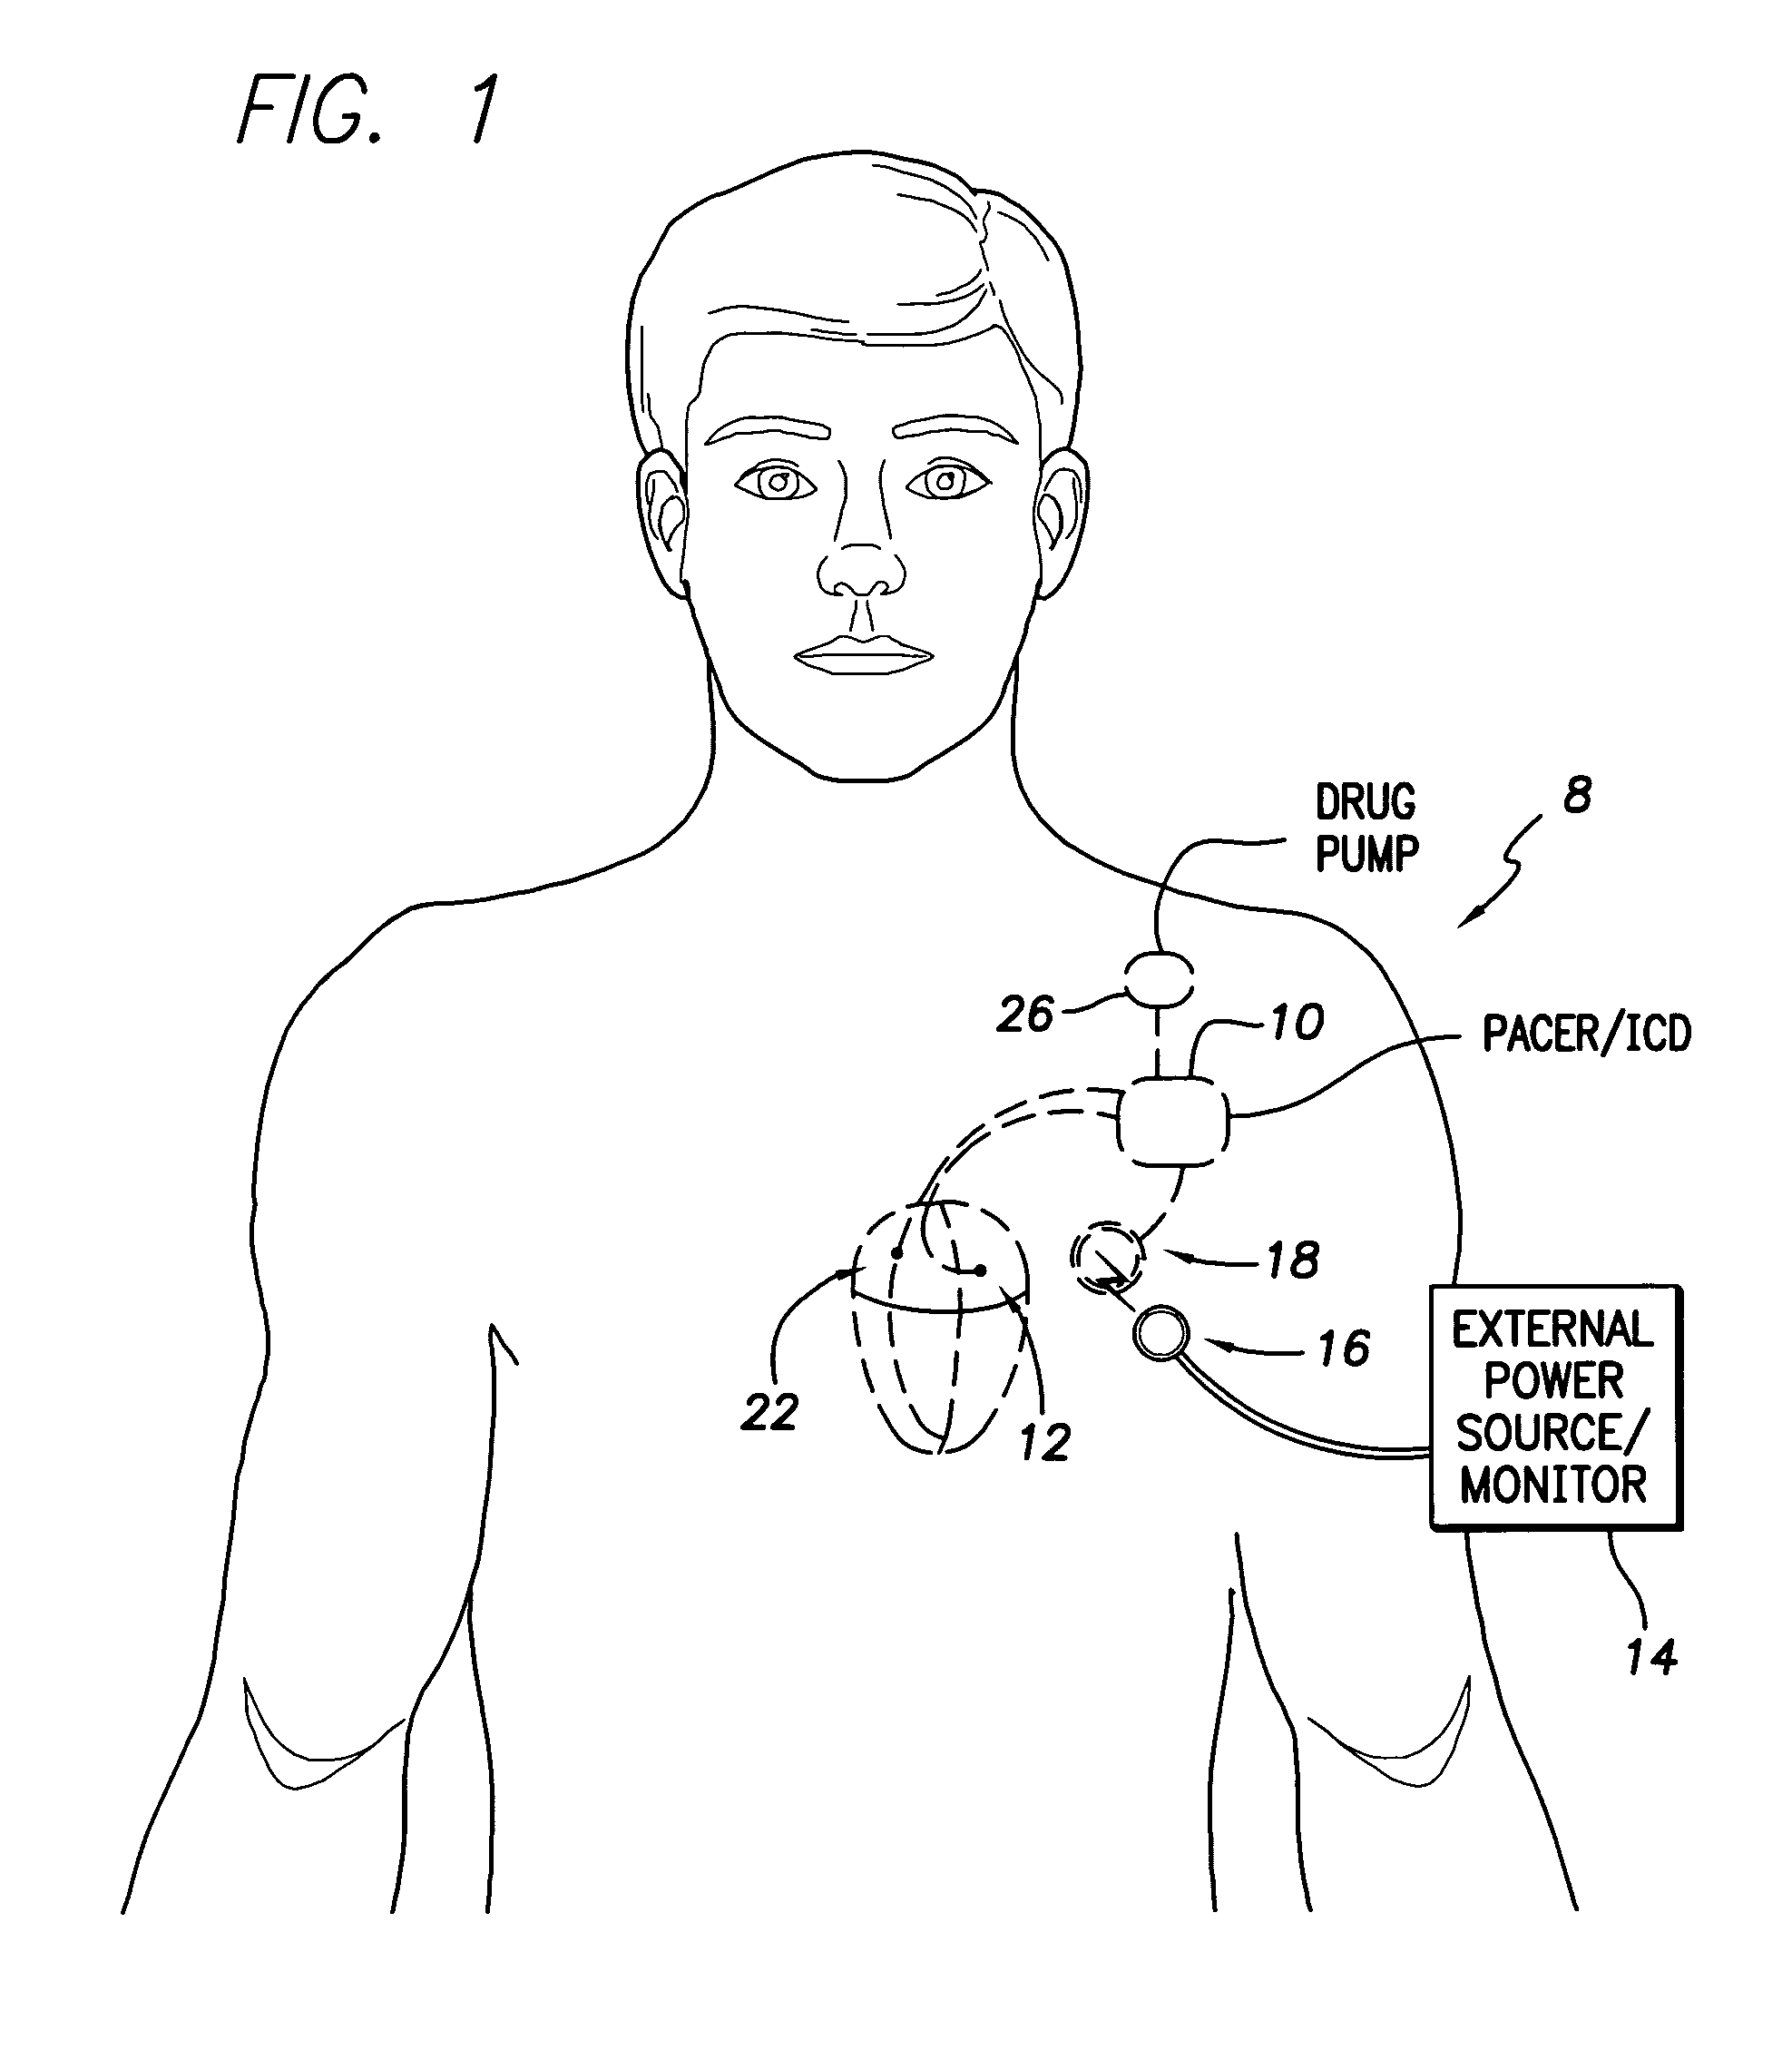 System and method for measuring cardiac output via thermal dilution using an implantable medical device with an external ultrasound power delivery system